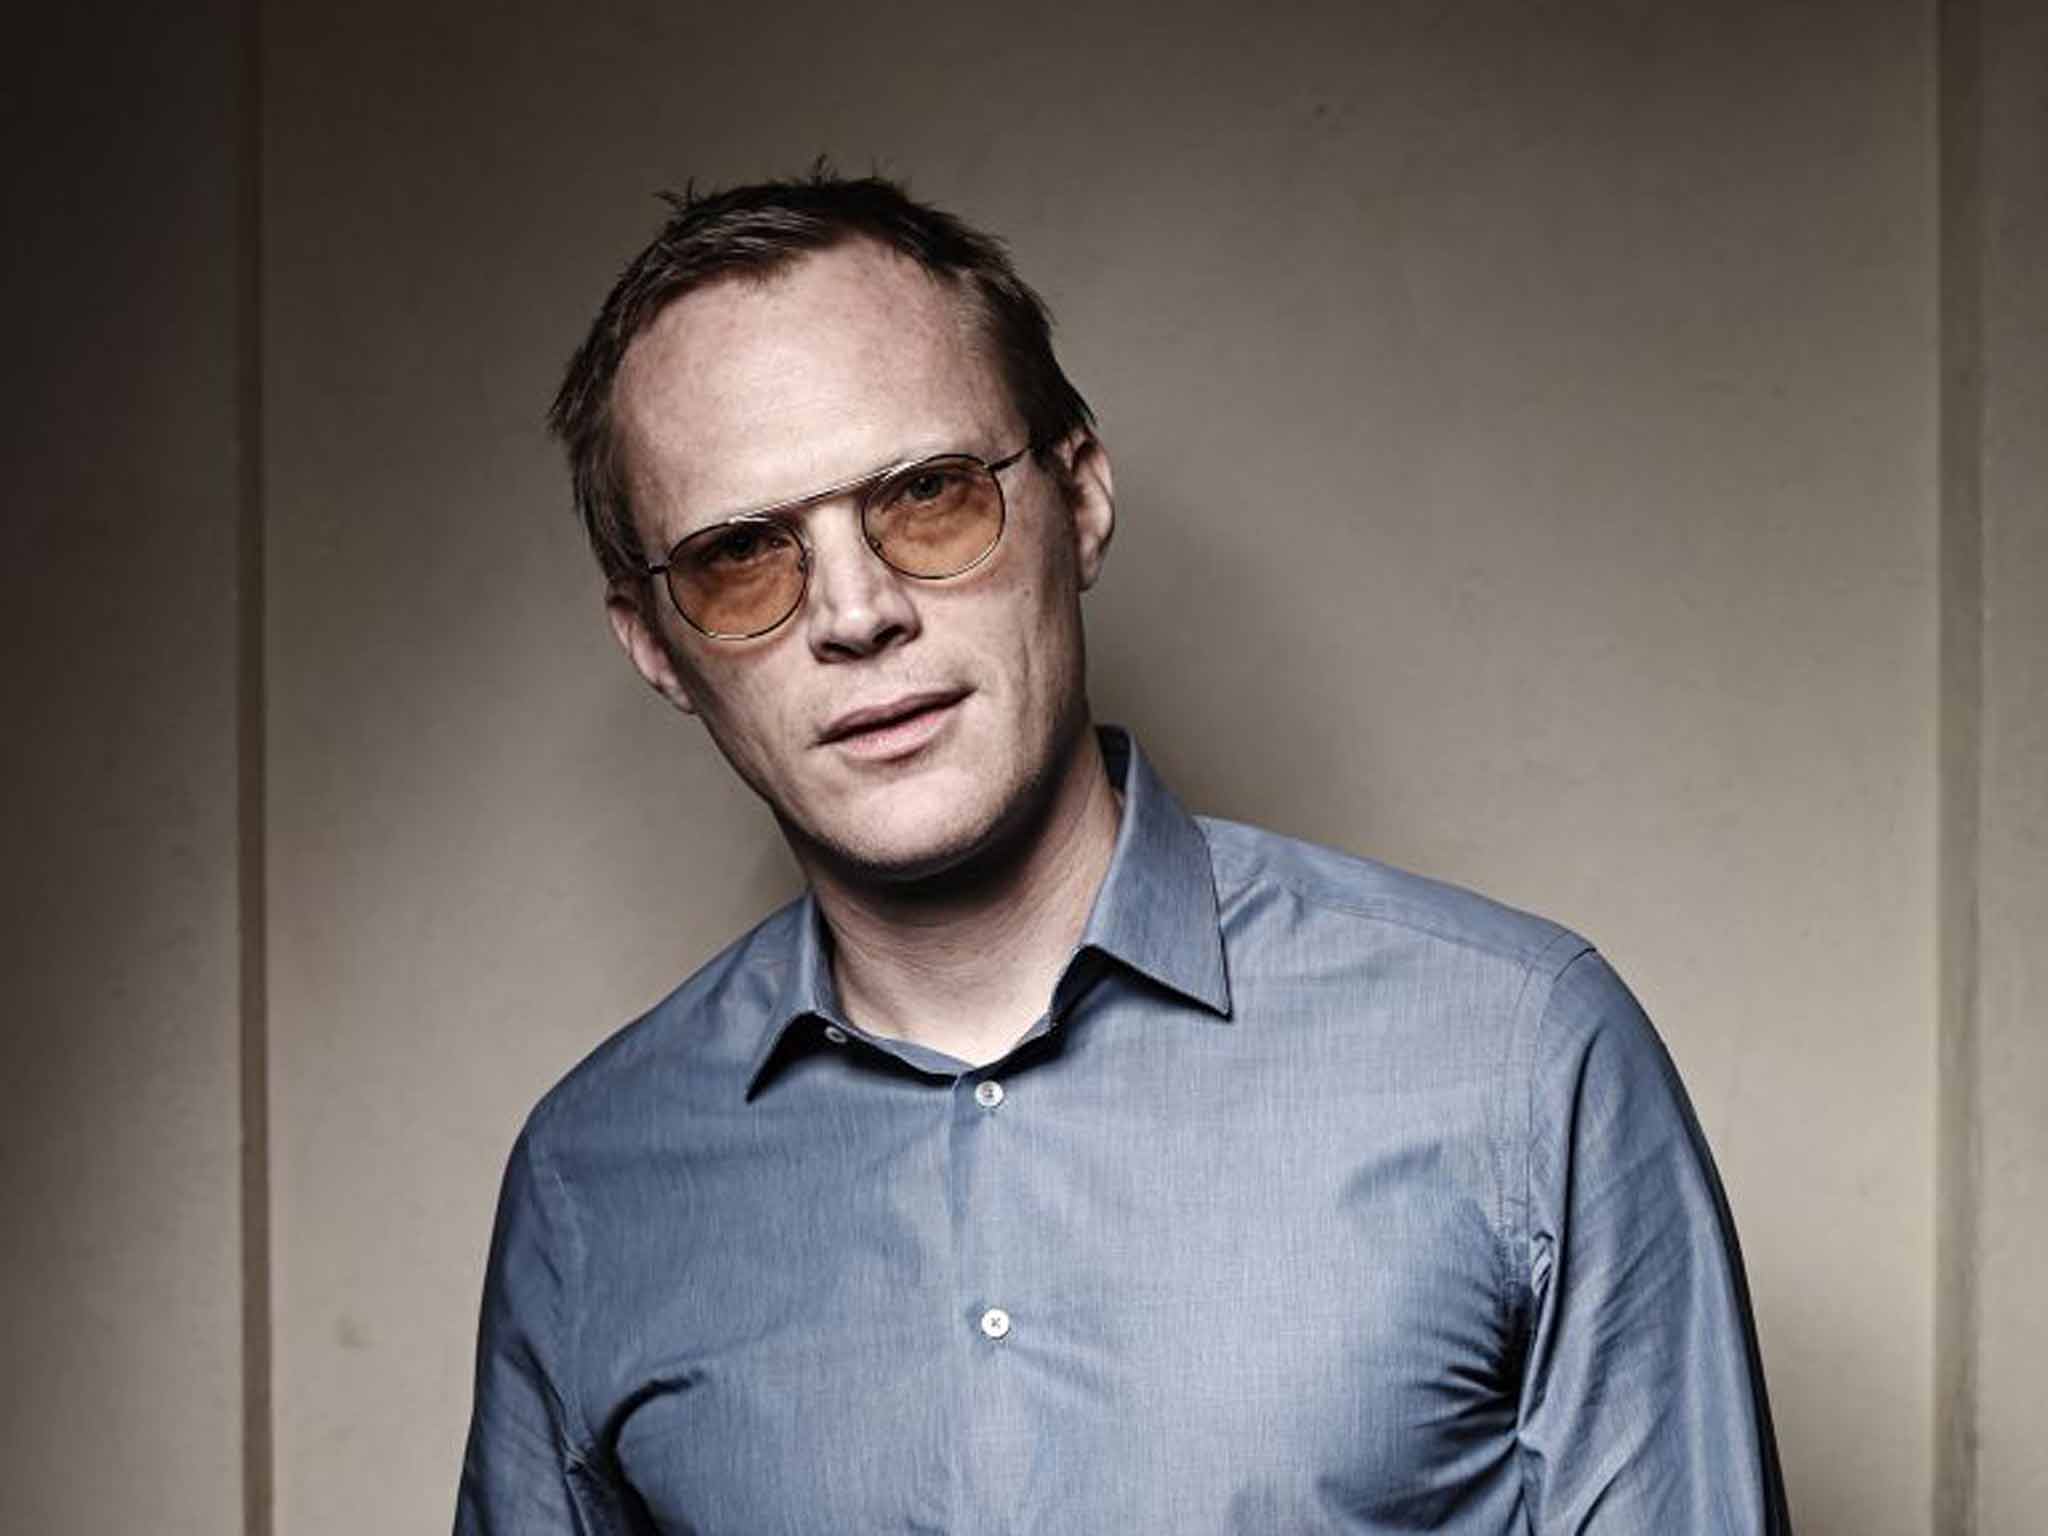 Shades of greatness: Paul Bettany